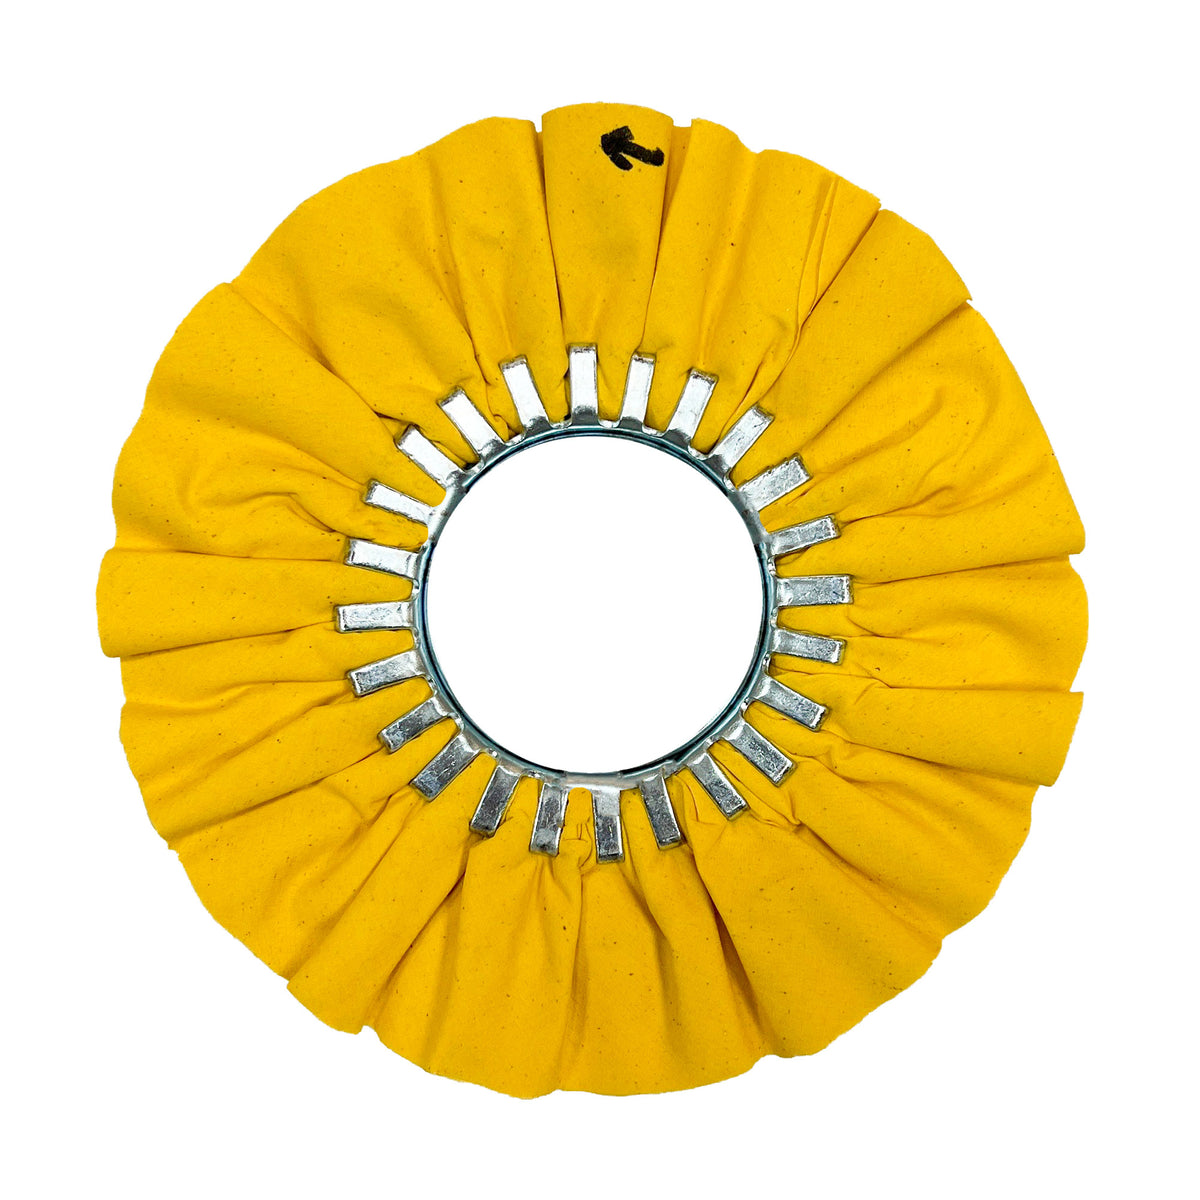 Renegade Products USA Yellow Airway Buffing Wheel - High-Quality Buffing and Polishing Tool for Exceptional Finishes